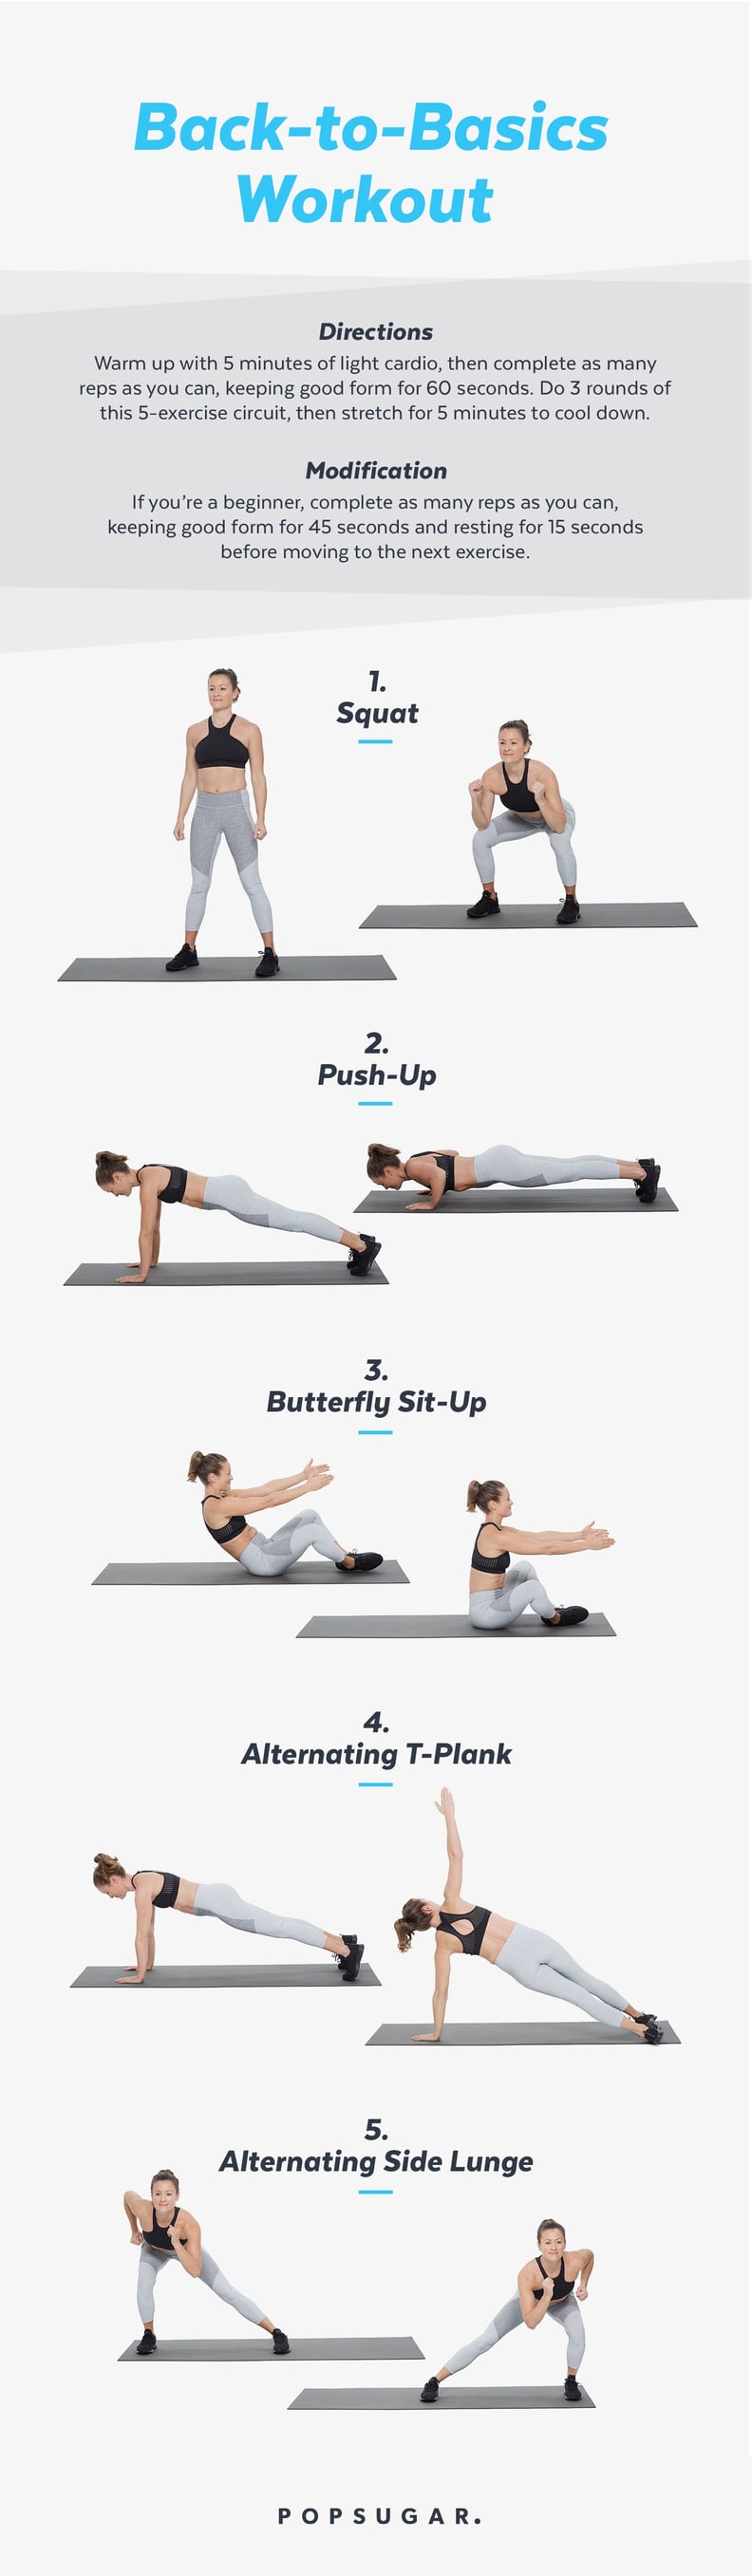 Upper body workout – click to view and print this illustrated